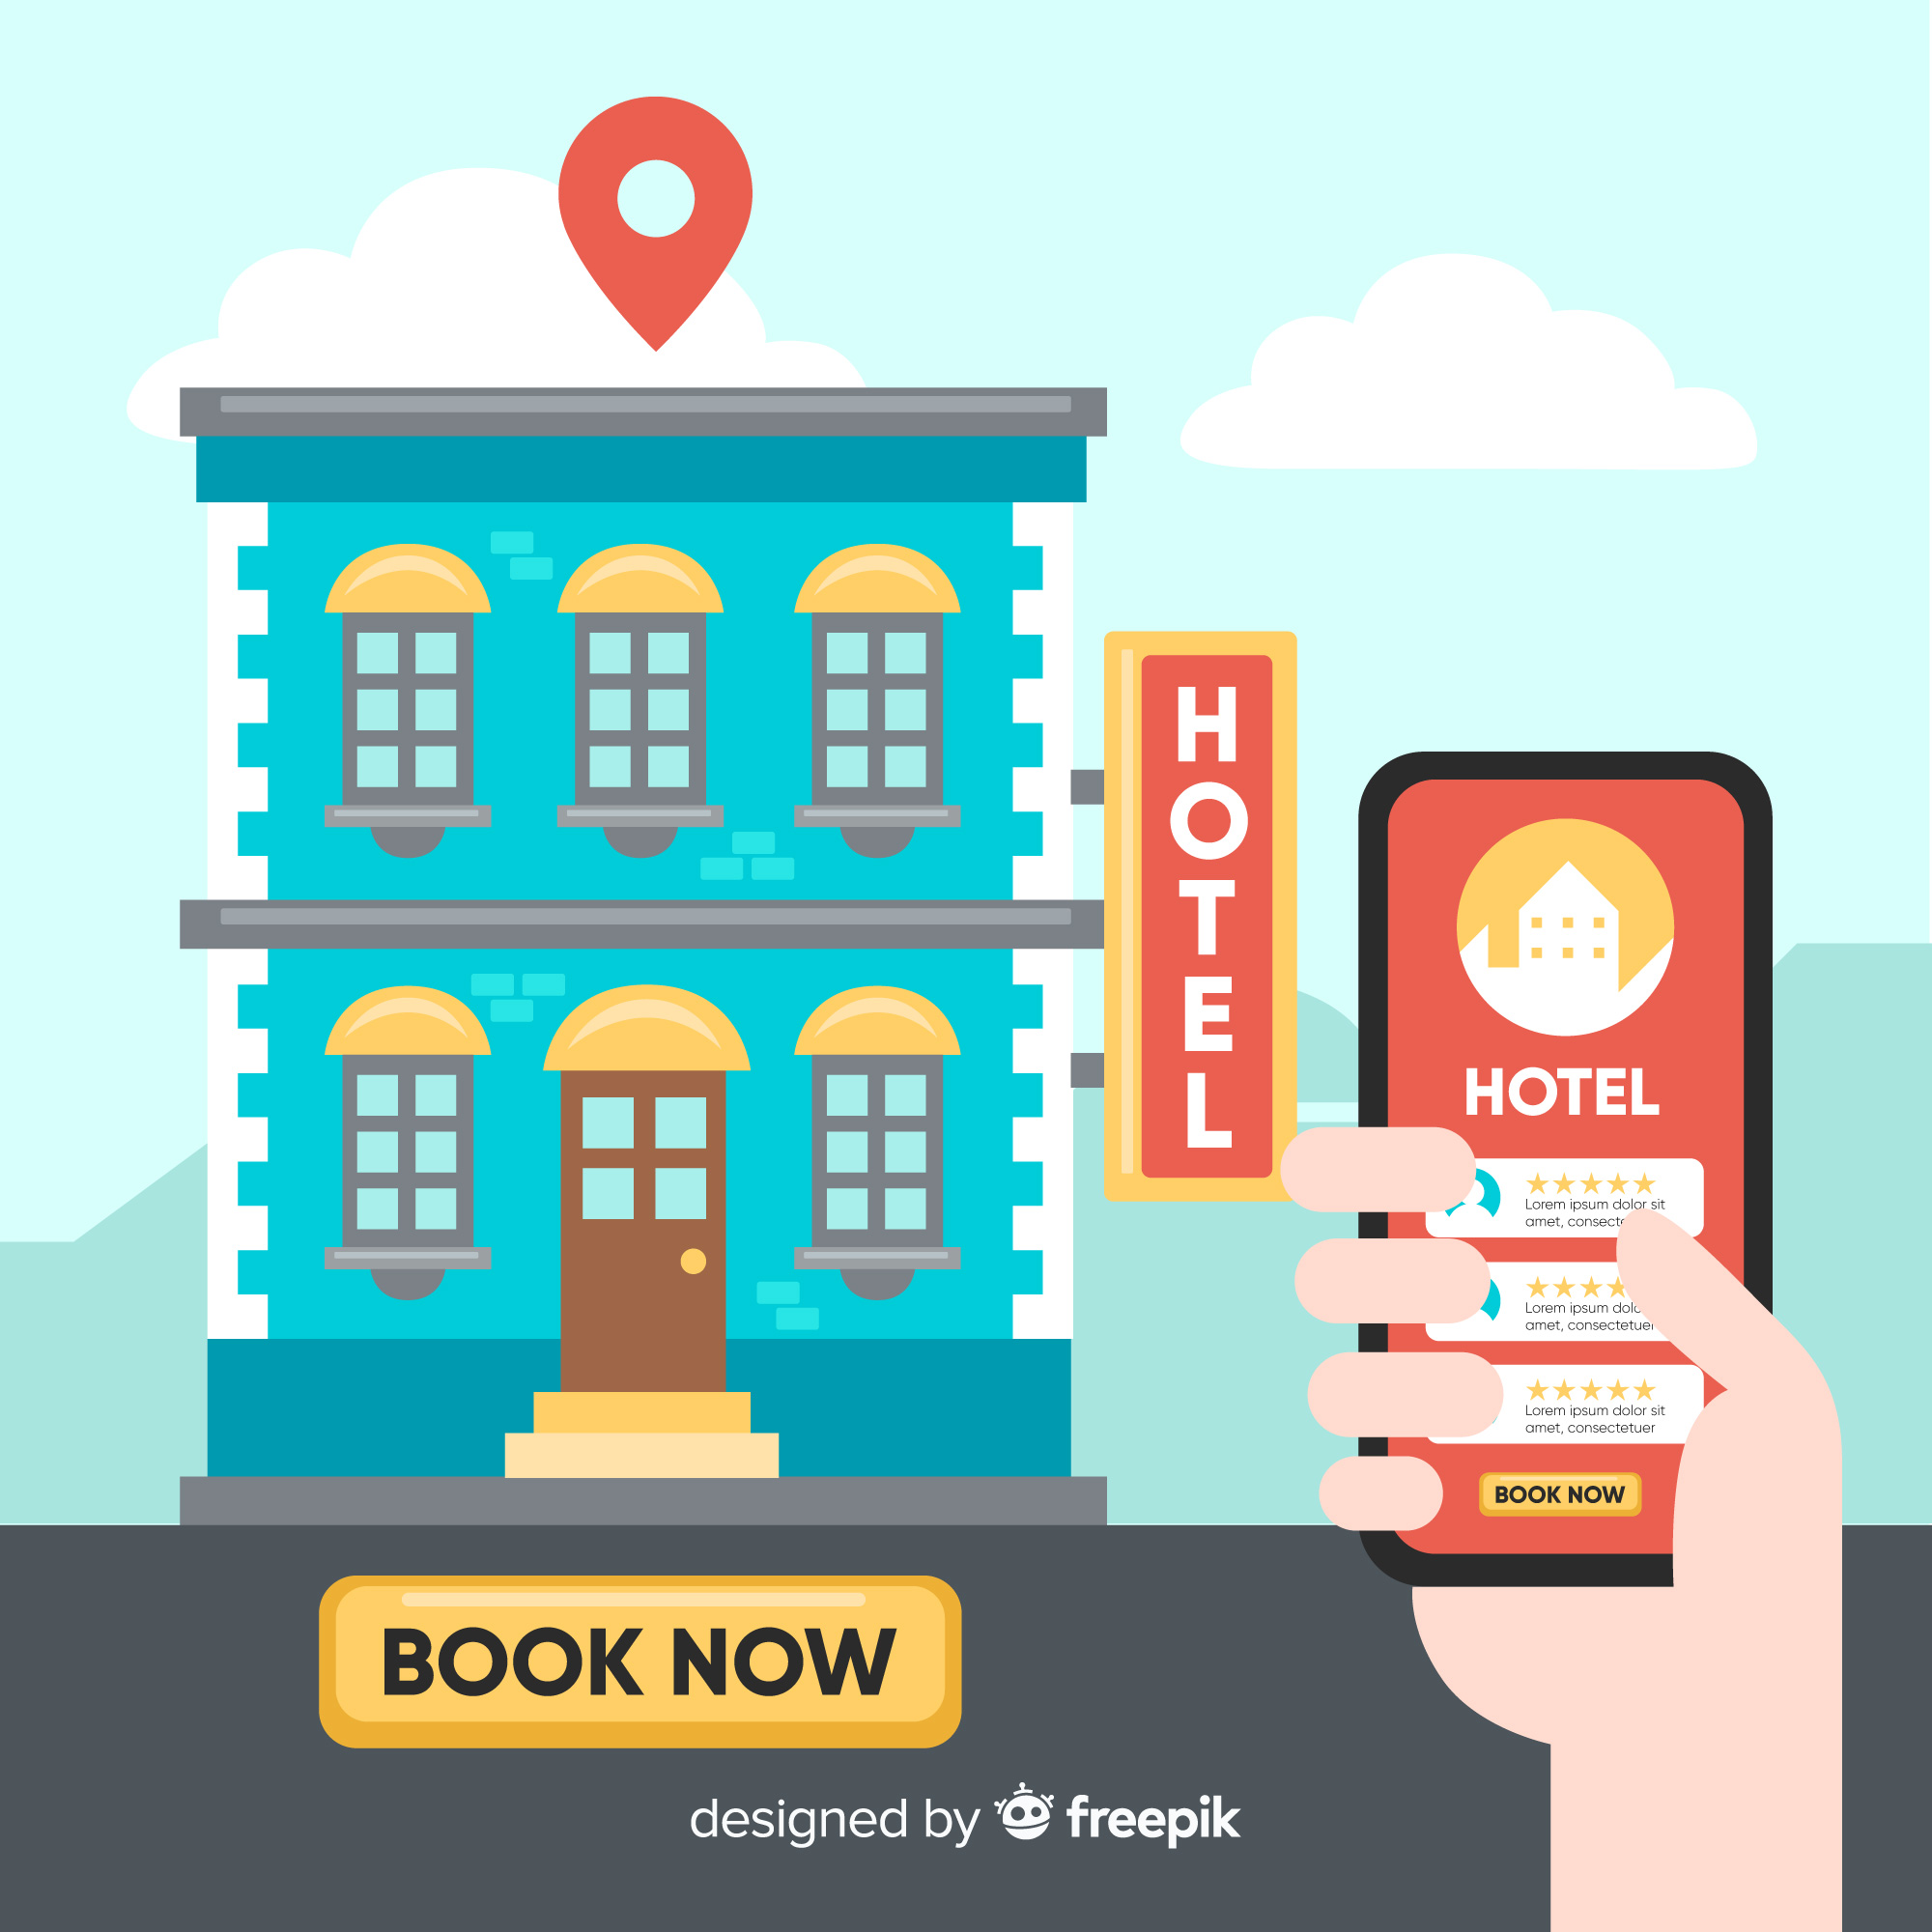 App for Hotel Booking